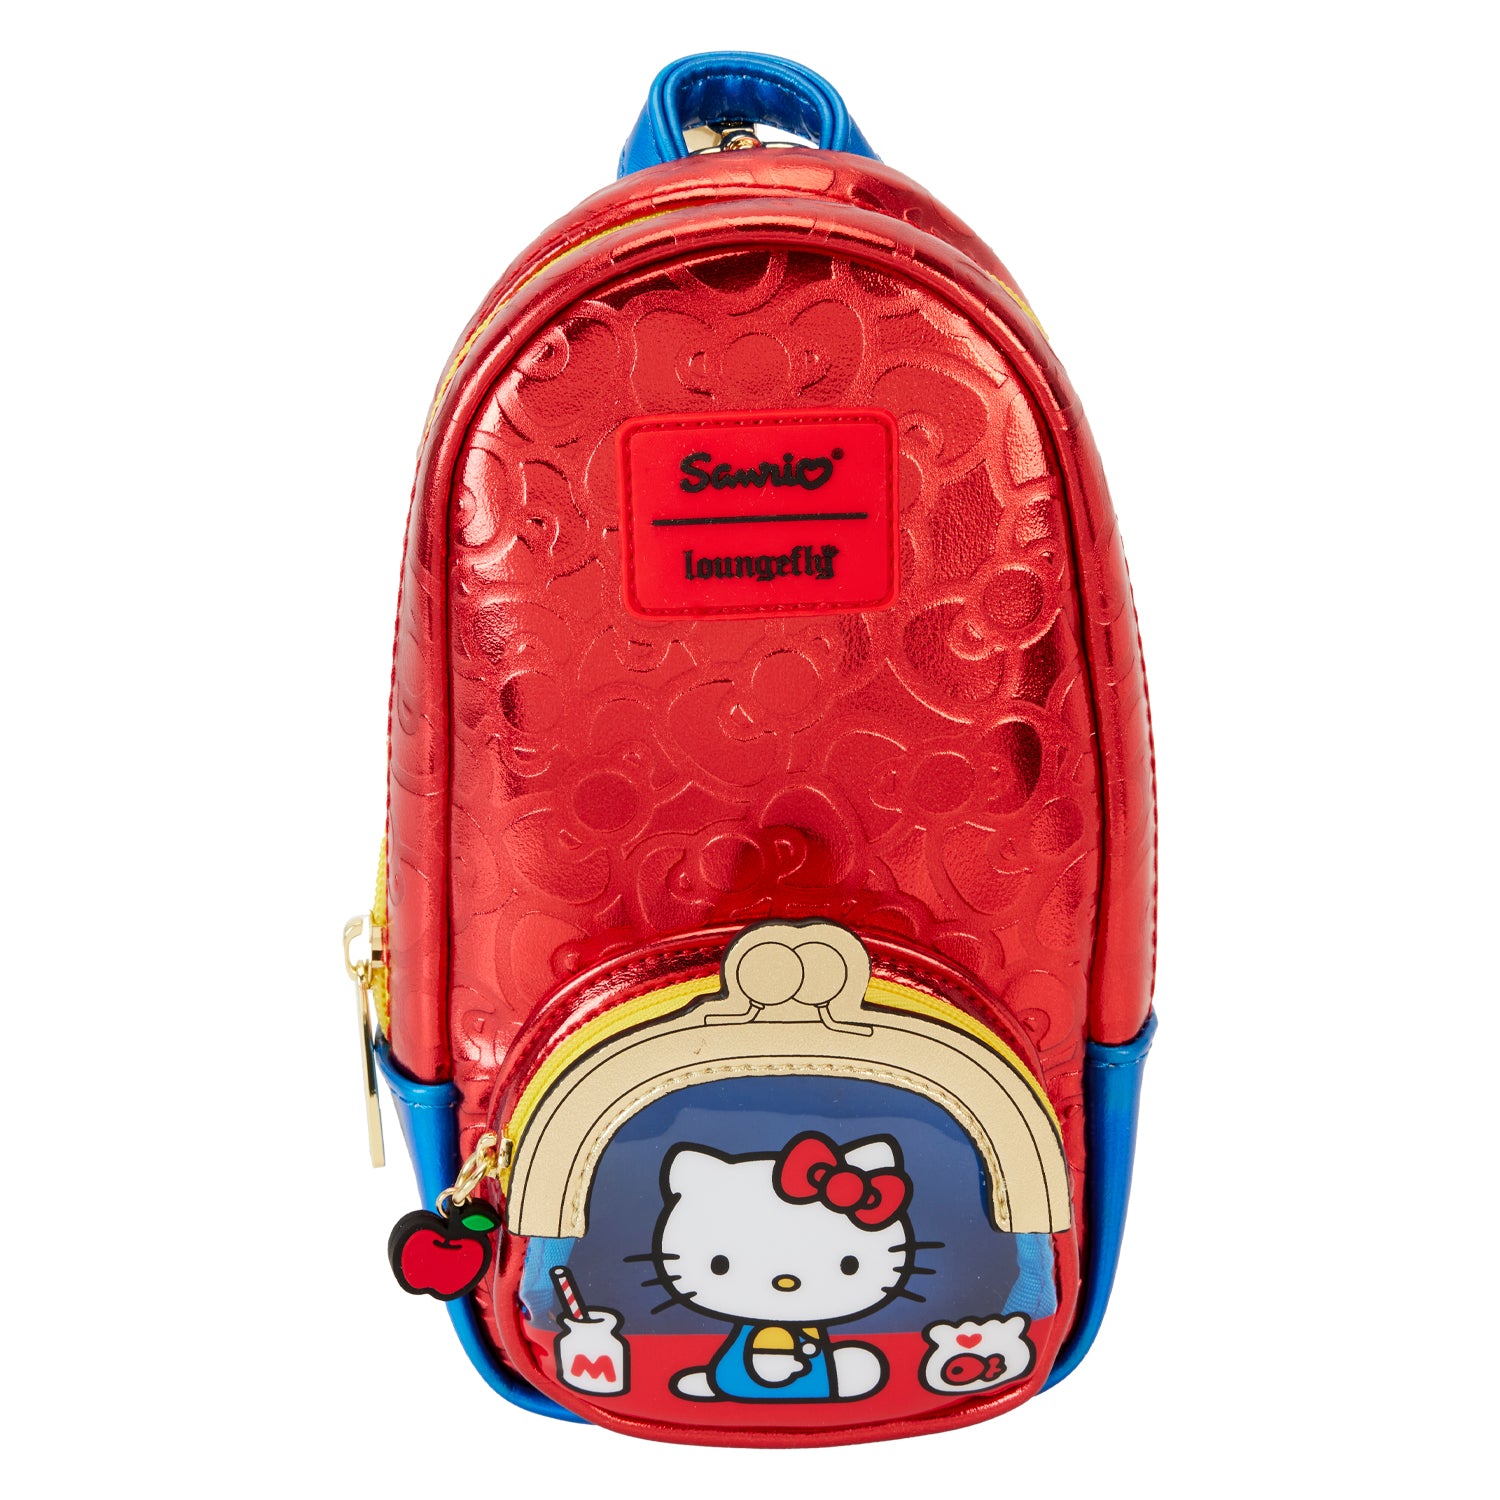 Hello Kitty x Loungefly 50th Anniversary Classic Mini Backpack Pencil Case Stationery Loungefly   